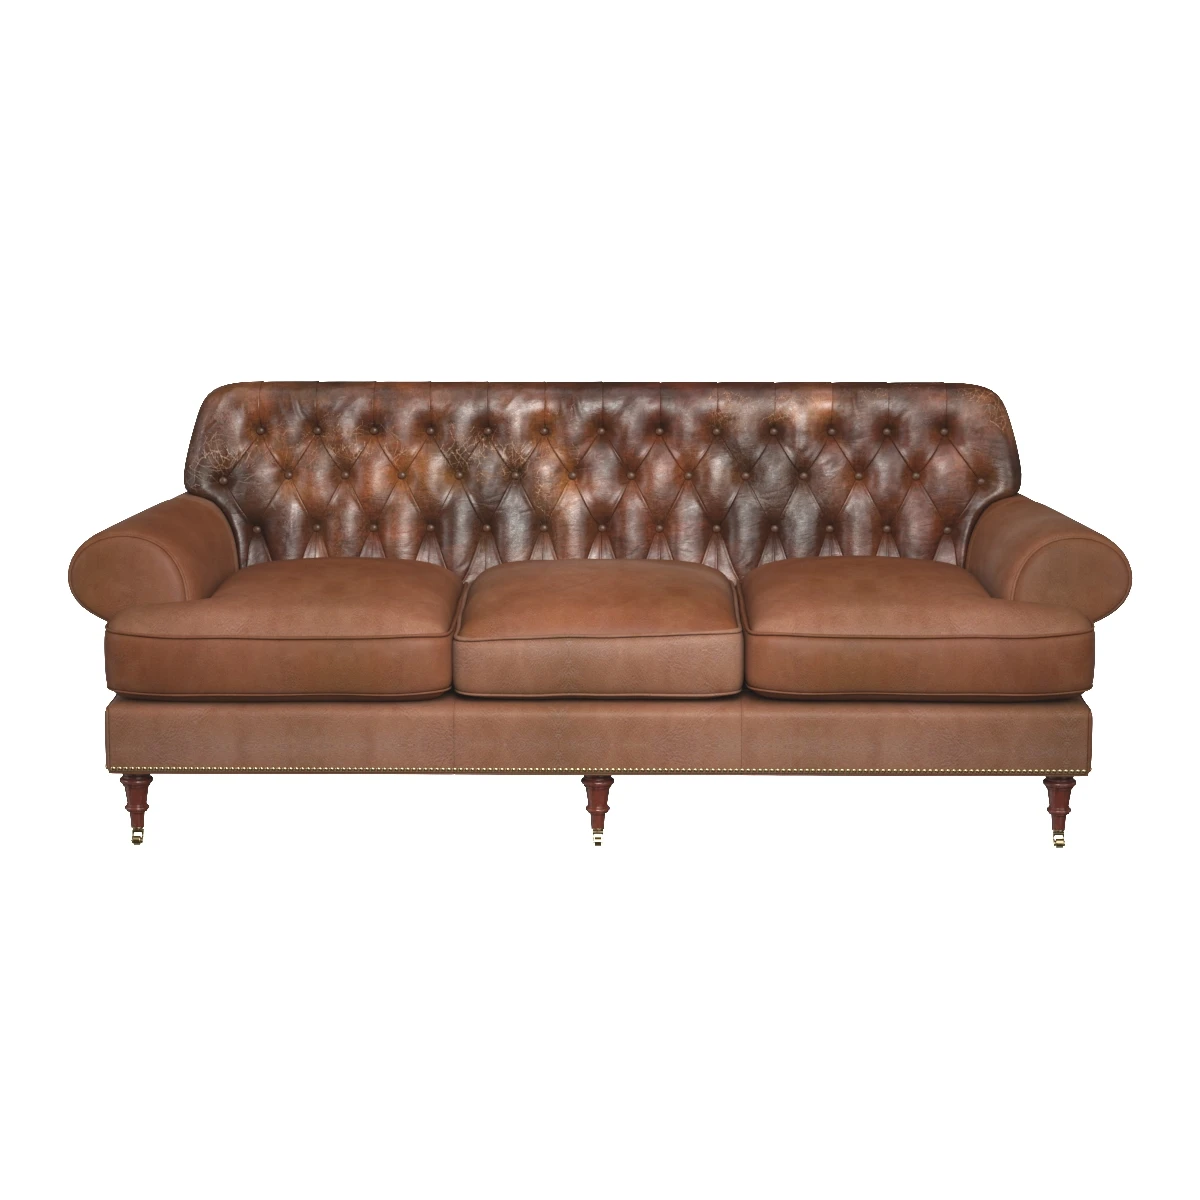 OHenry House Ltd Tufted Brown Leather Three Seat Sofa 3D Model_06